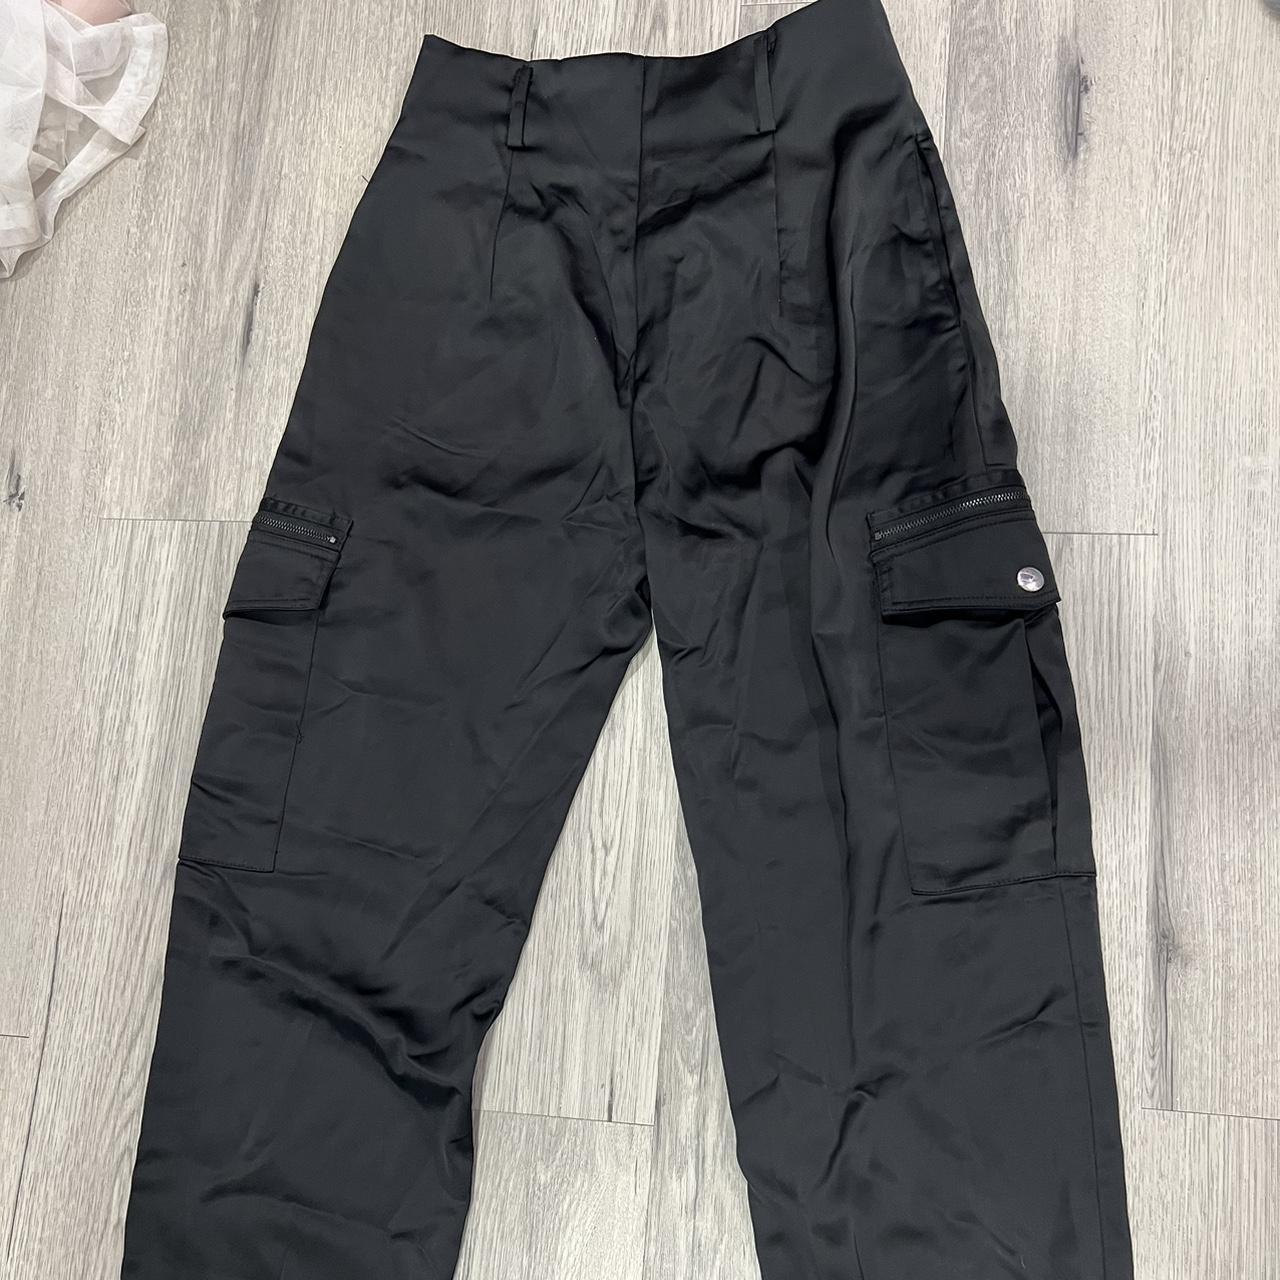 I Saw It First Women's Black Trousers (2)